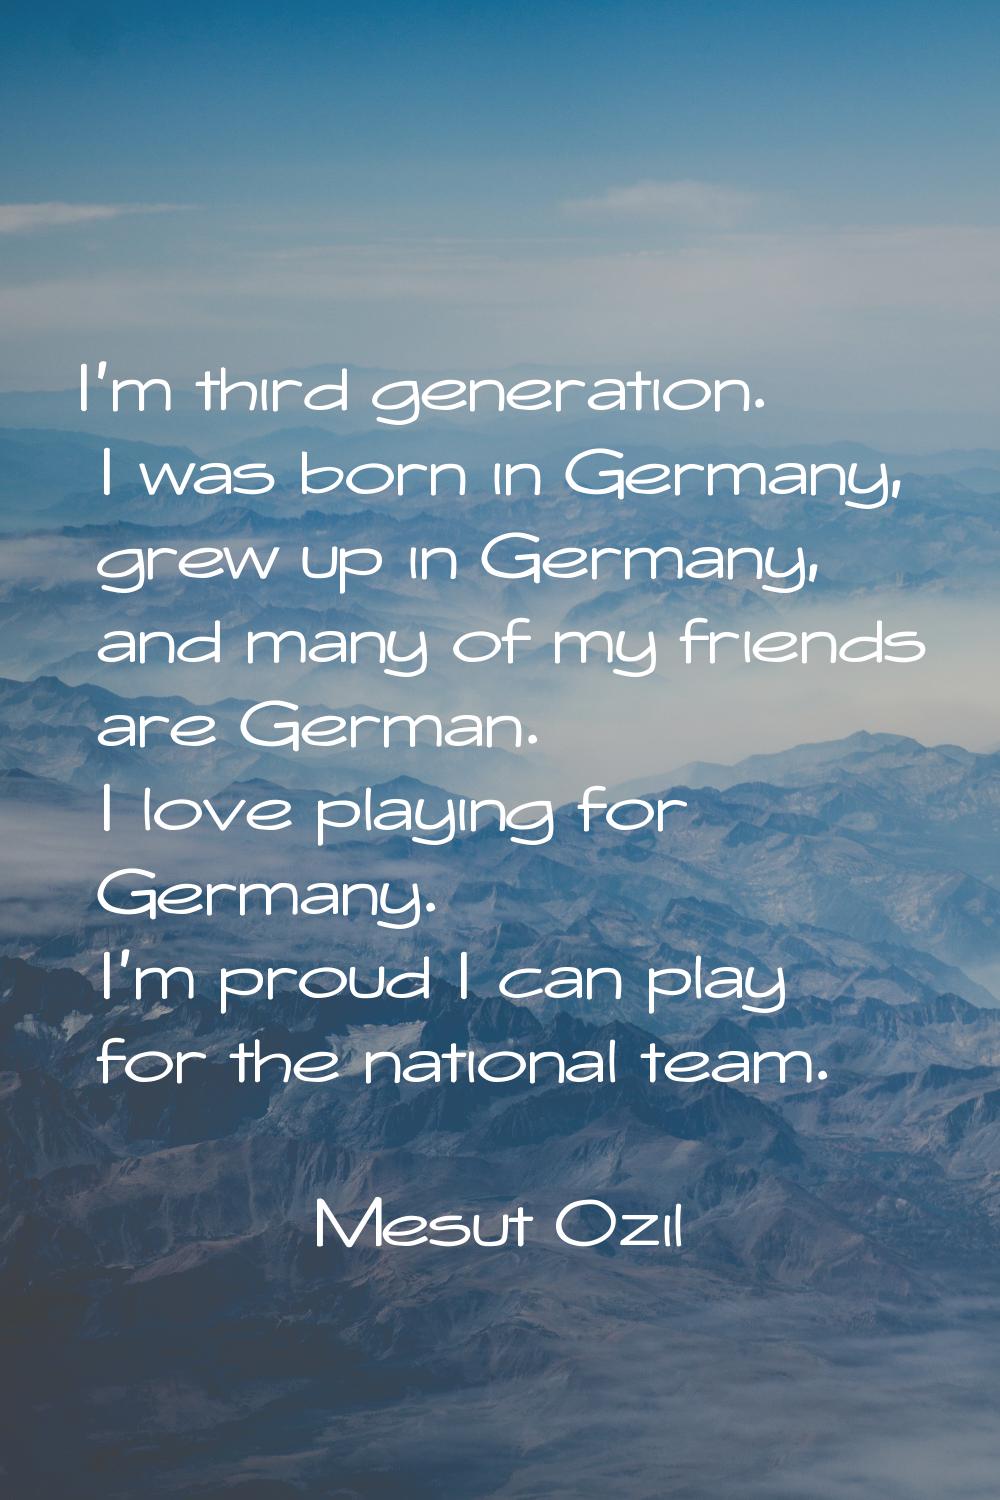 I'm third generation. I was born in Germany, grew up in Germany, and many of my friends are German.